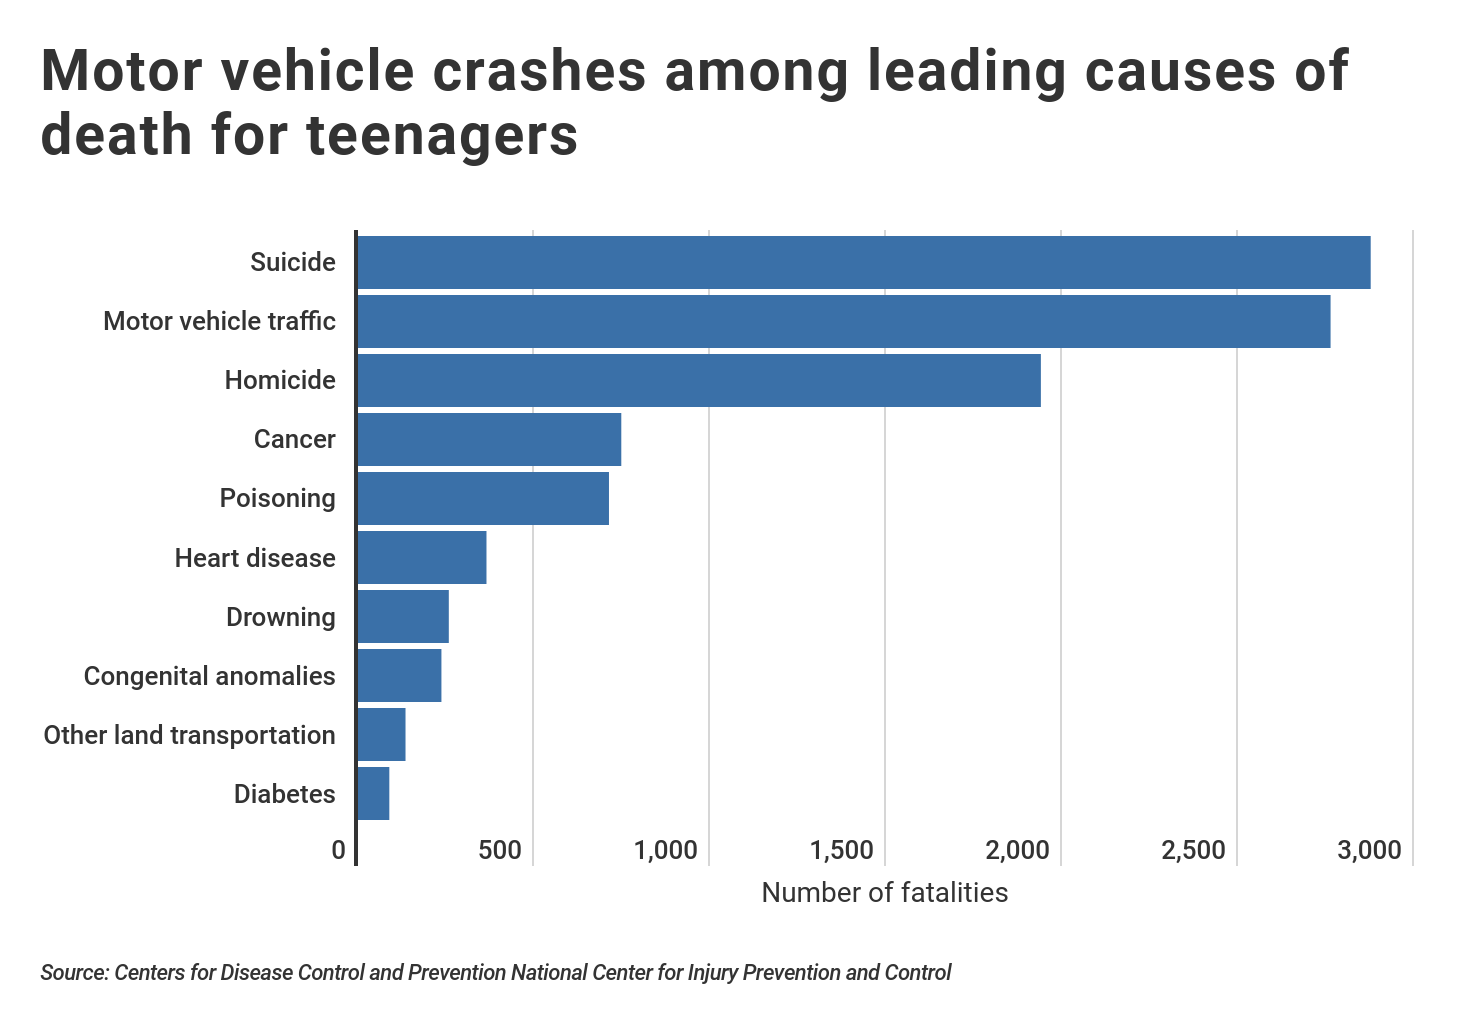 Fatal Traffic Accidents are a Leading Cause of Death for Teenagers